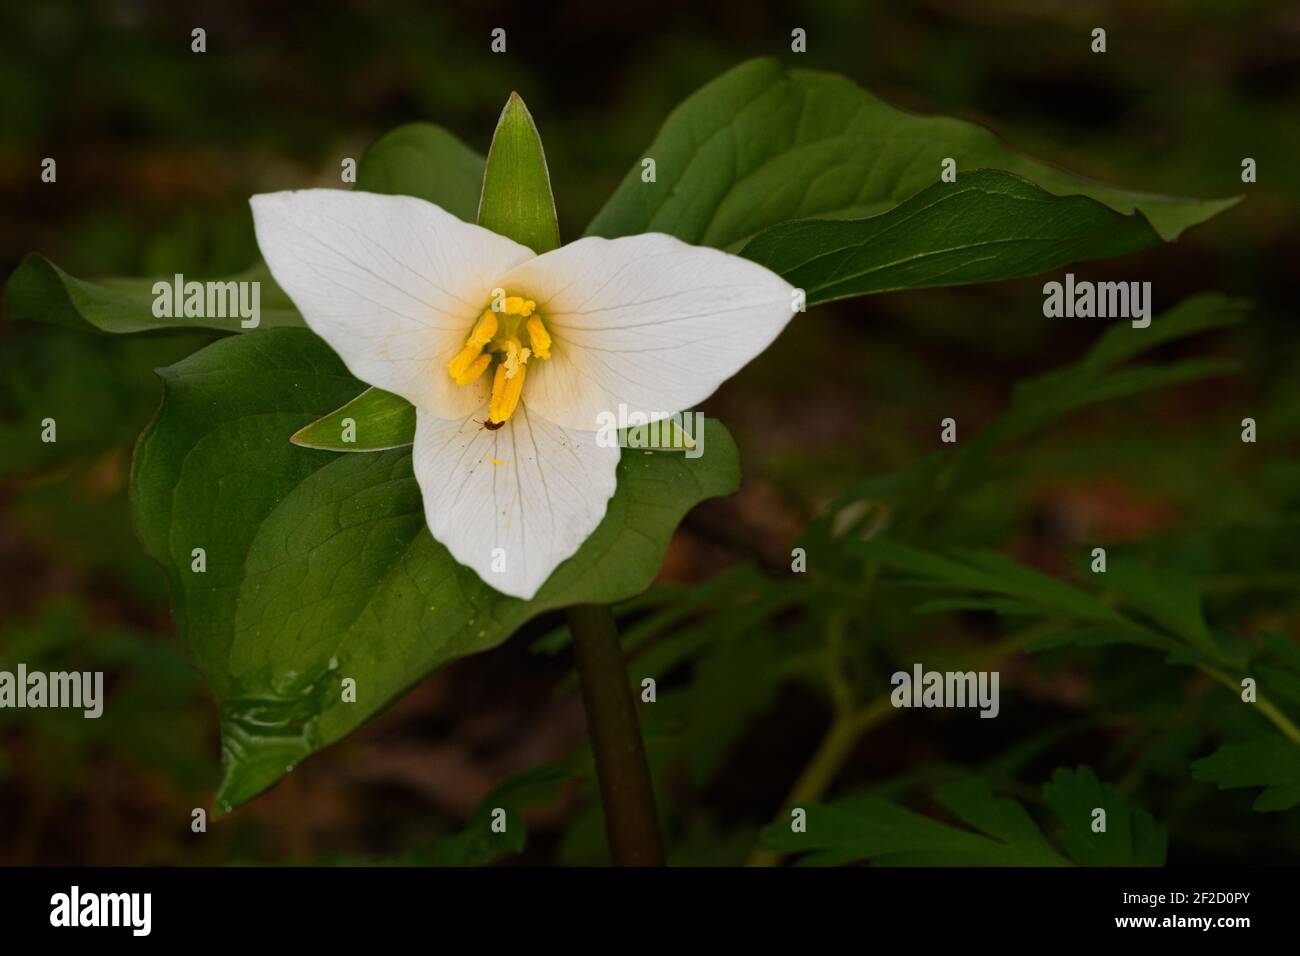 Western White Trillium in the shadows open its white petals to give a highlight in the darkness of the forest floor of the Snoqualmie Valley in spring Stock Photo